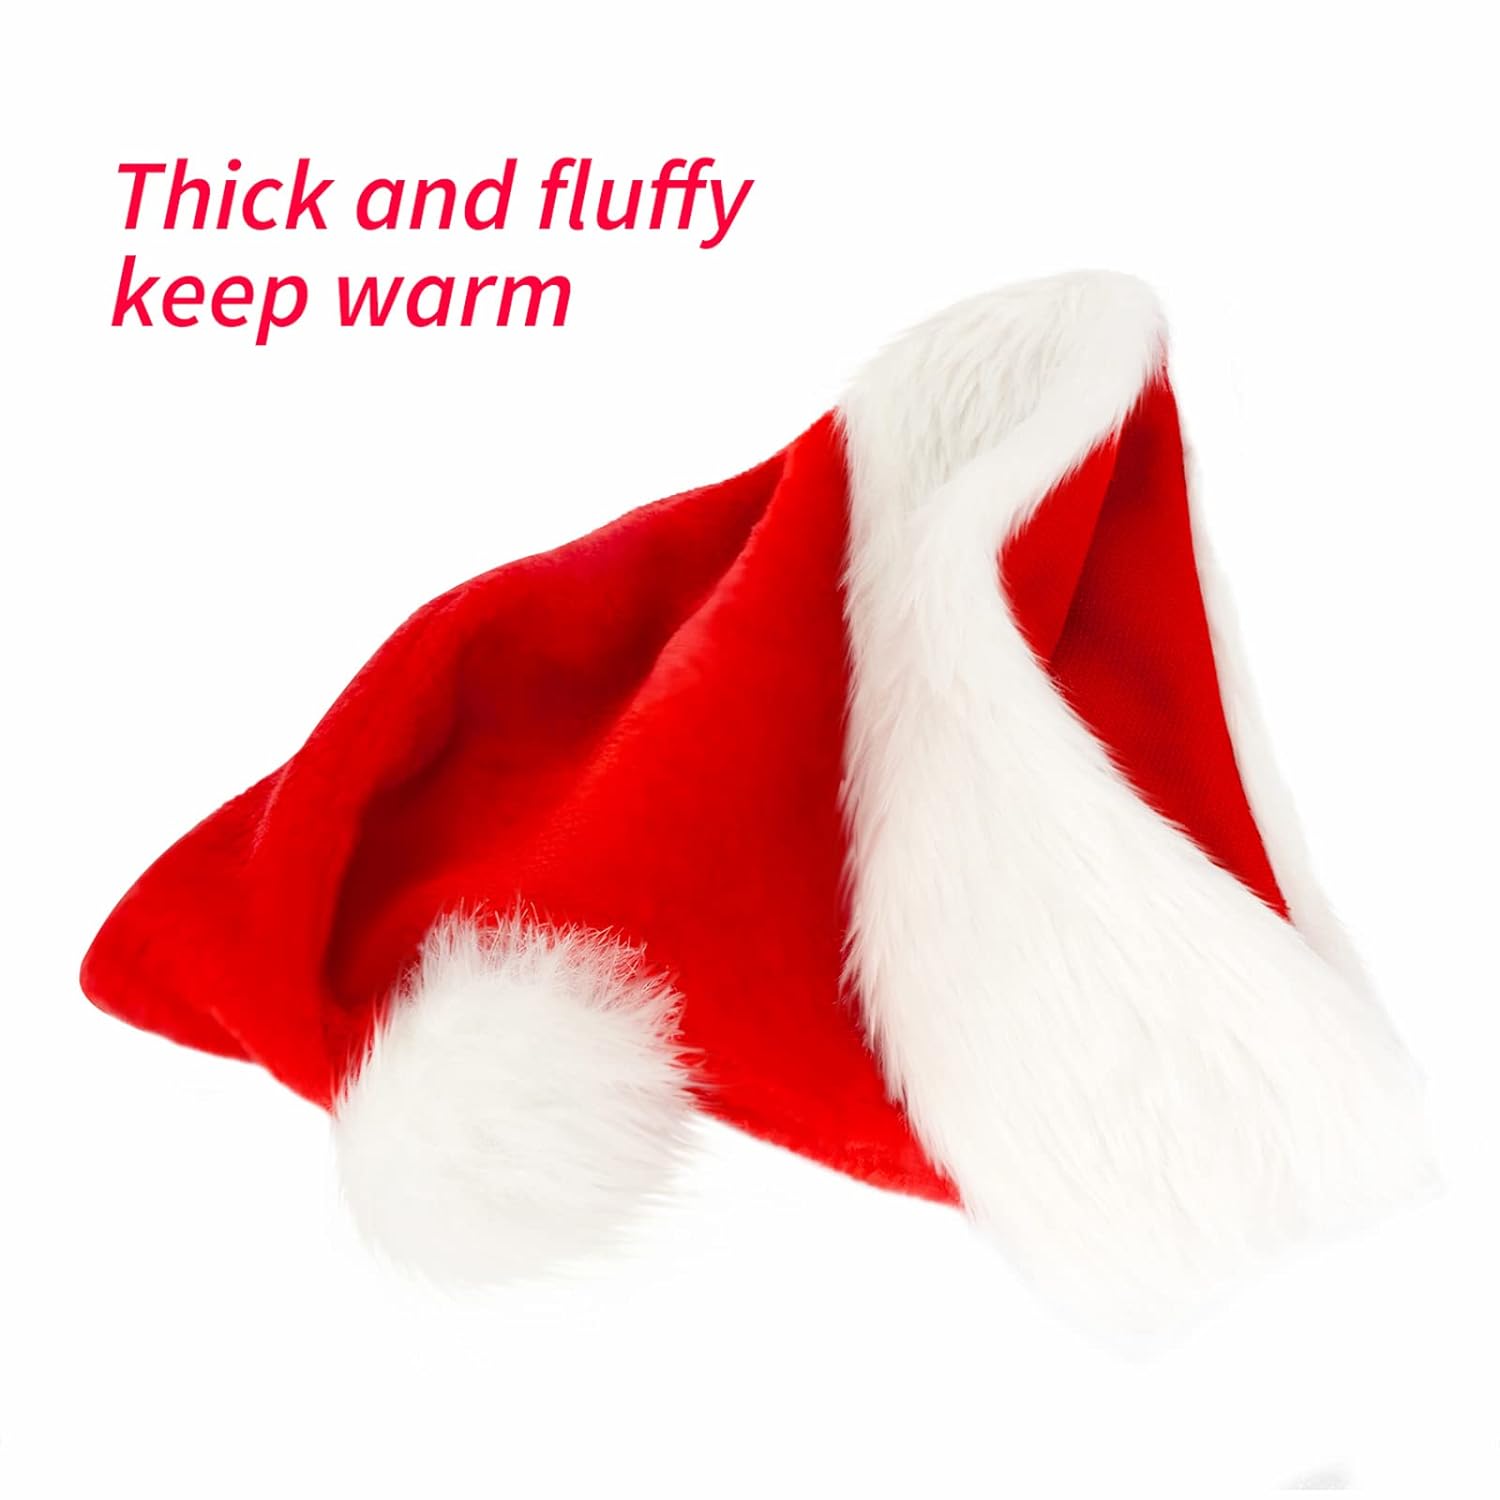 eCraftIndia Red and White Velvet Classic Fur Merry Christmas Hats, Santa Claus Caps for kids and Adults - XMAS Caps, Santa Hats for Christmas, New Year, Festive Holiday Party Celebration (Set of 18) 5